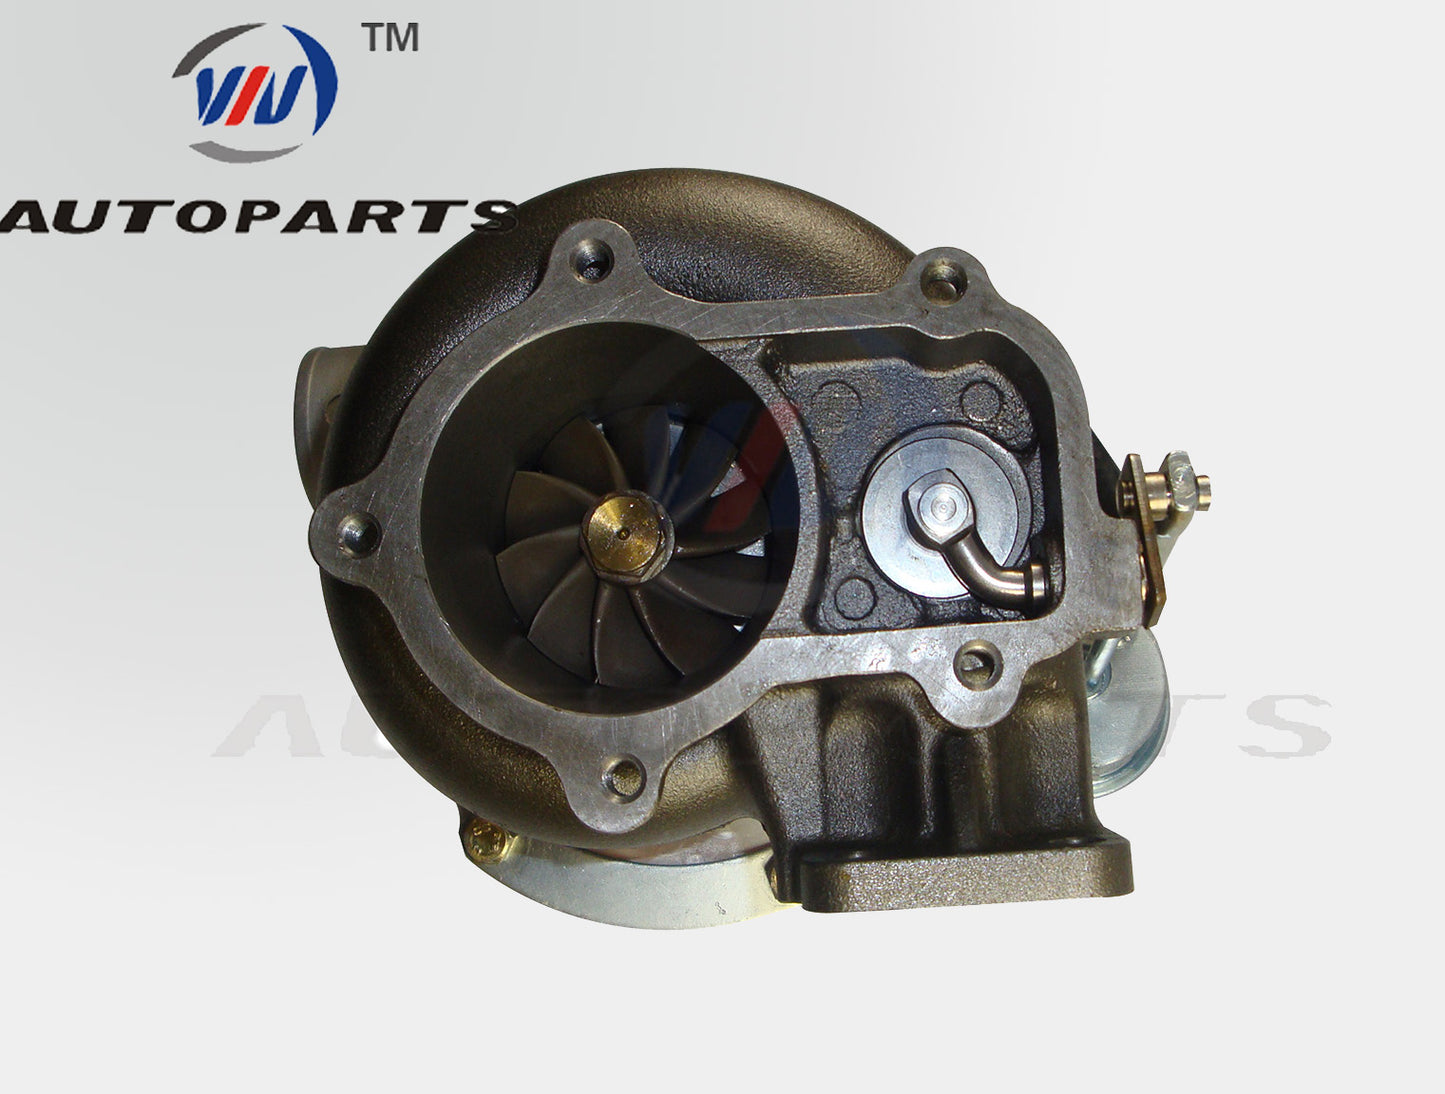 GT3540 GT3582 Upgrade billet A/R.50 A/R 1.06 5 bolt Water Cool Turbo Charger for 400-600hp